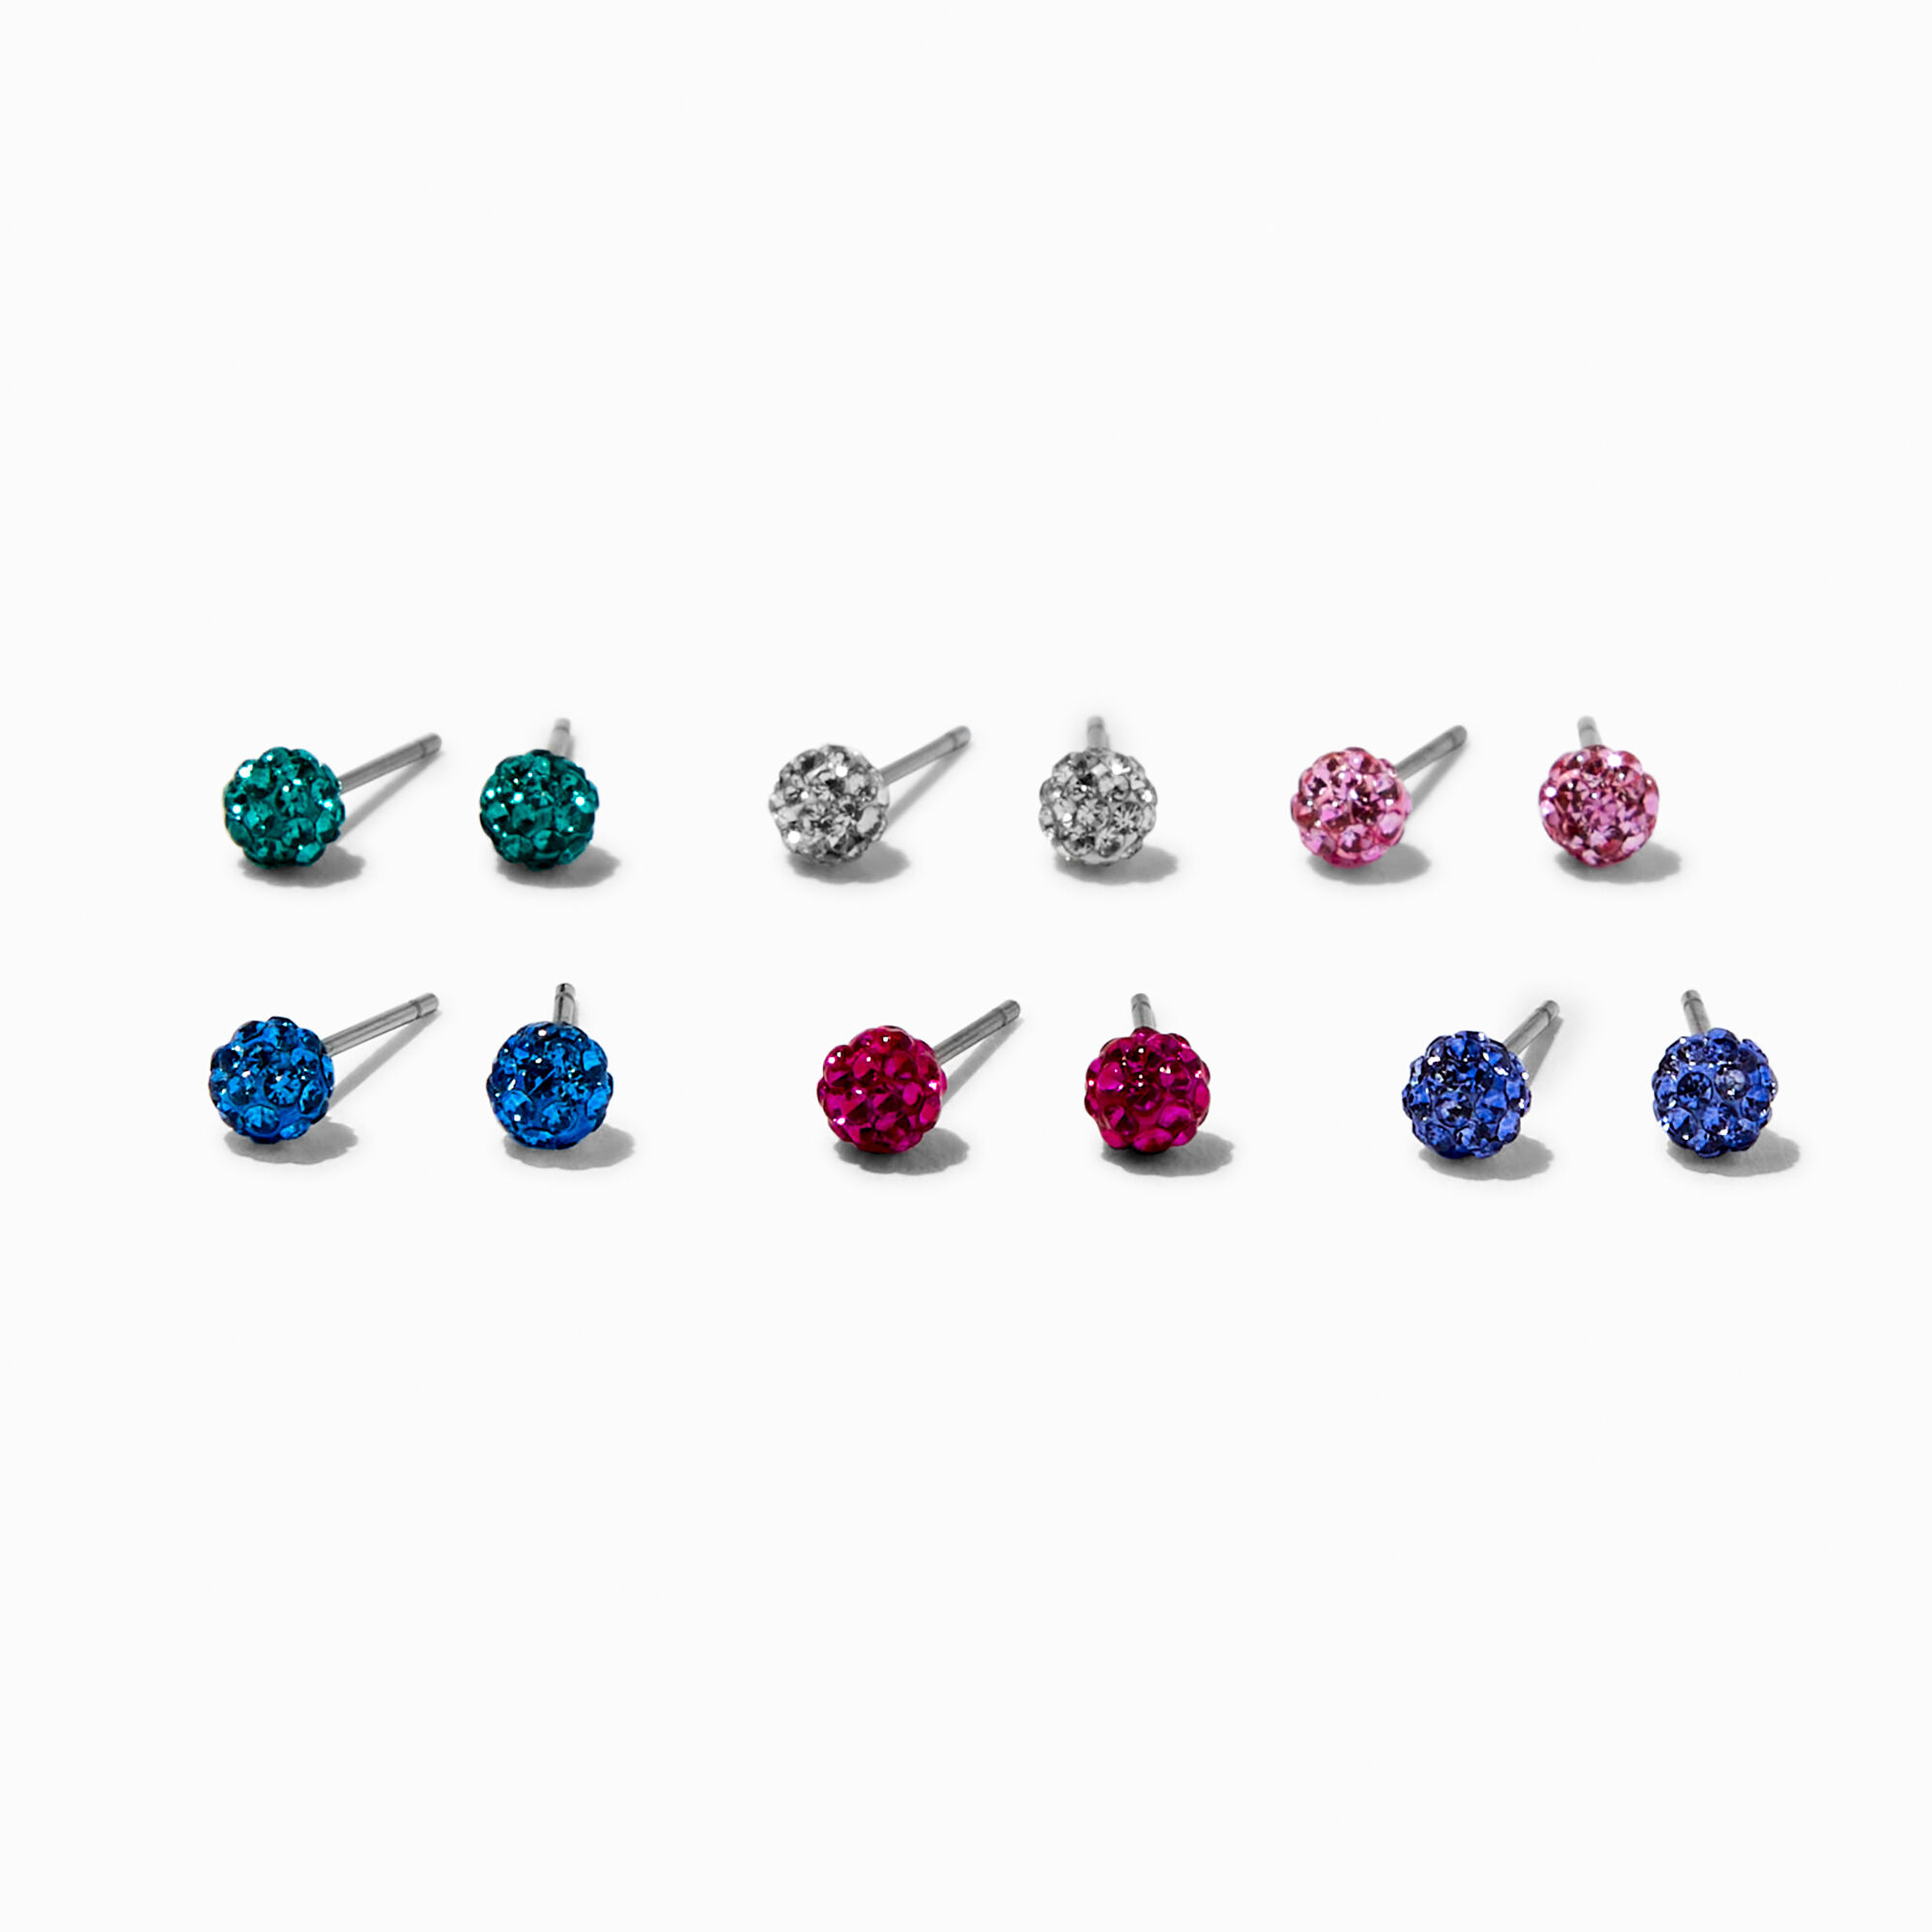 View Claires Crystal Fireball Stud Earrings 6 Pack information